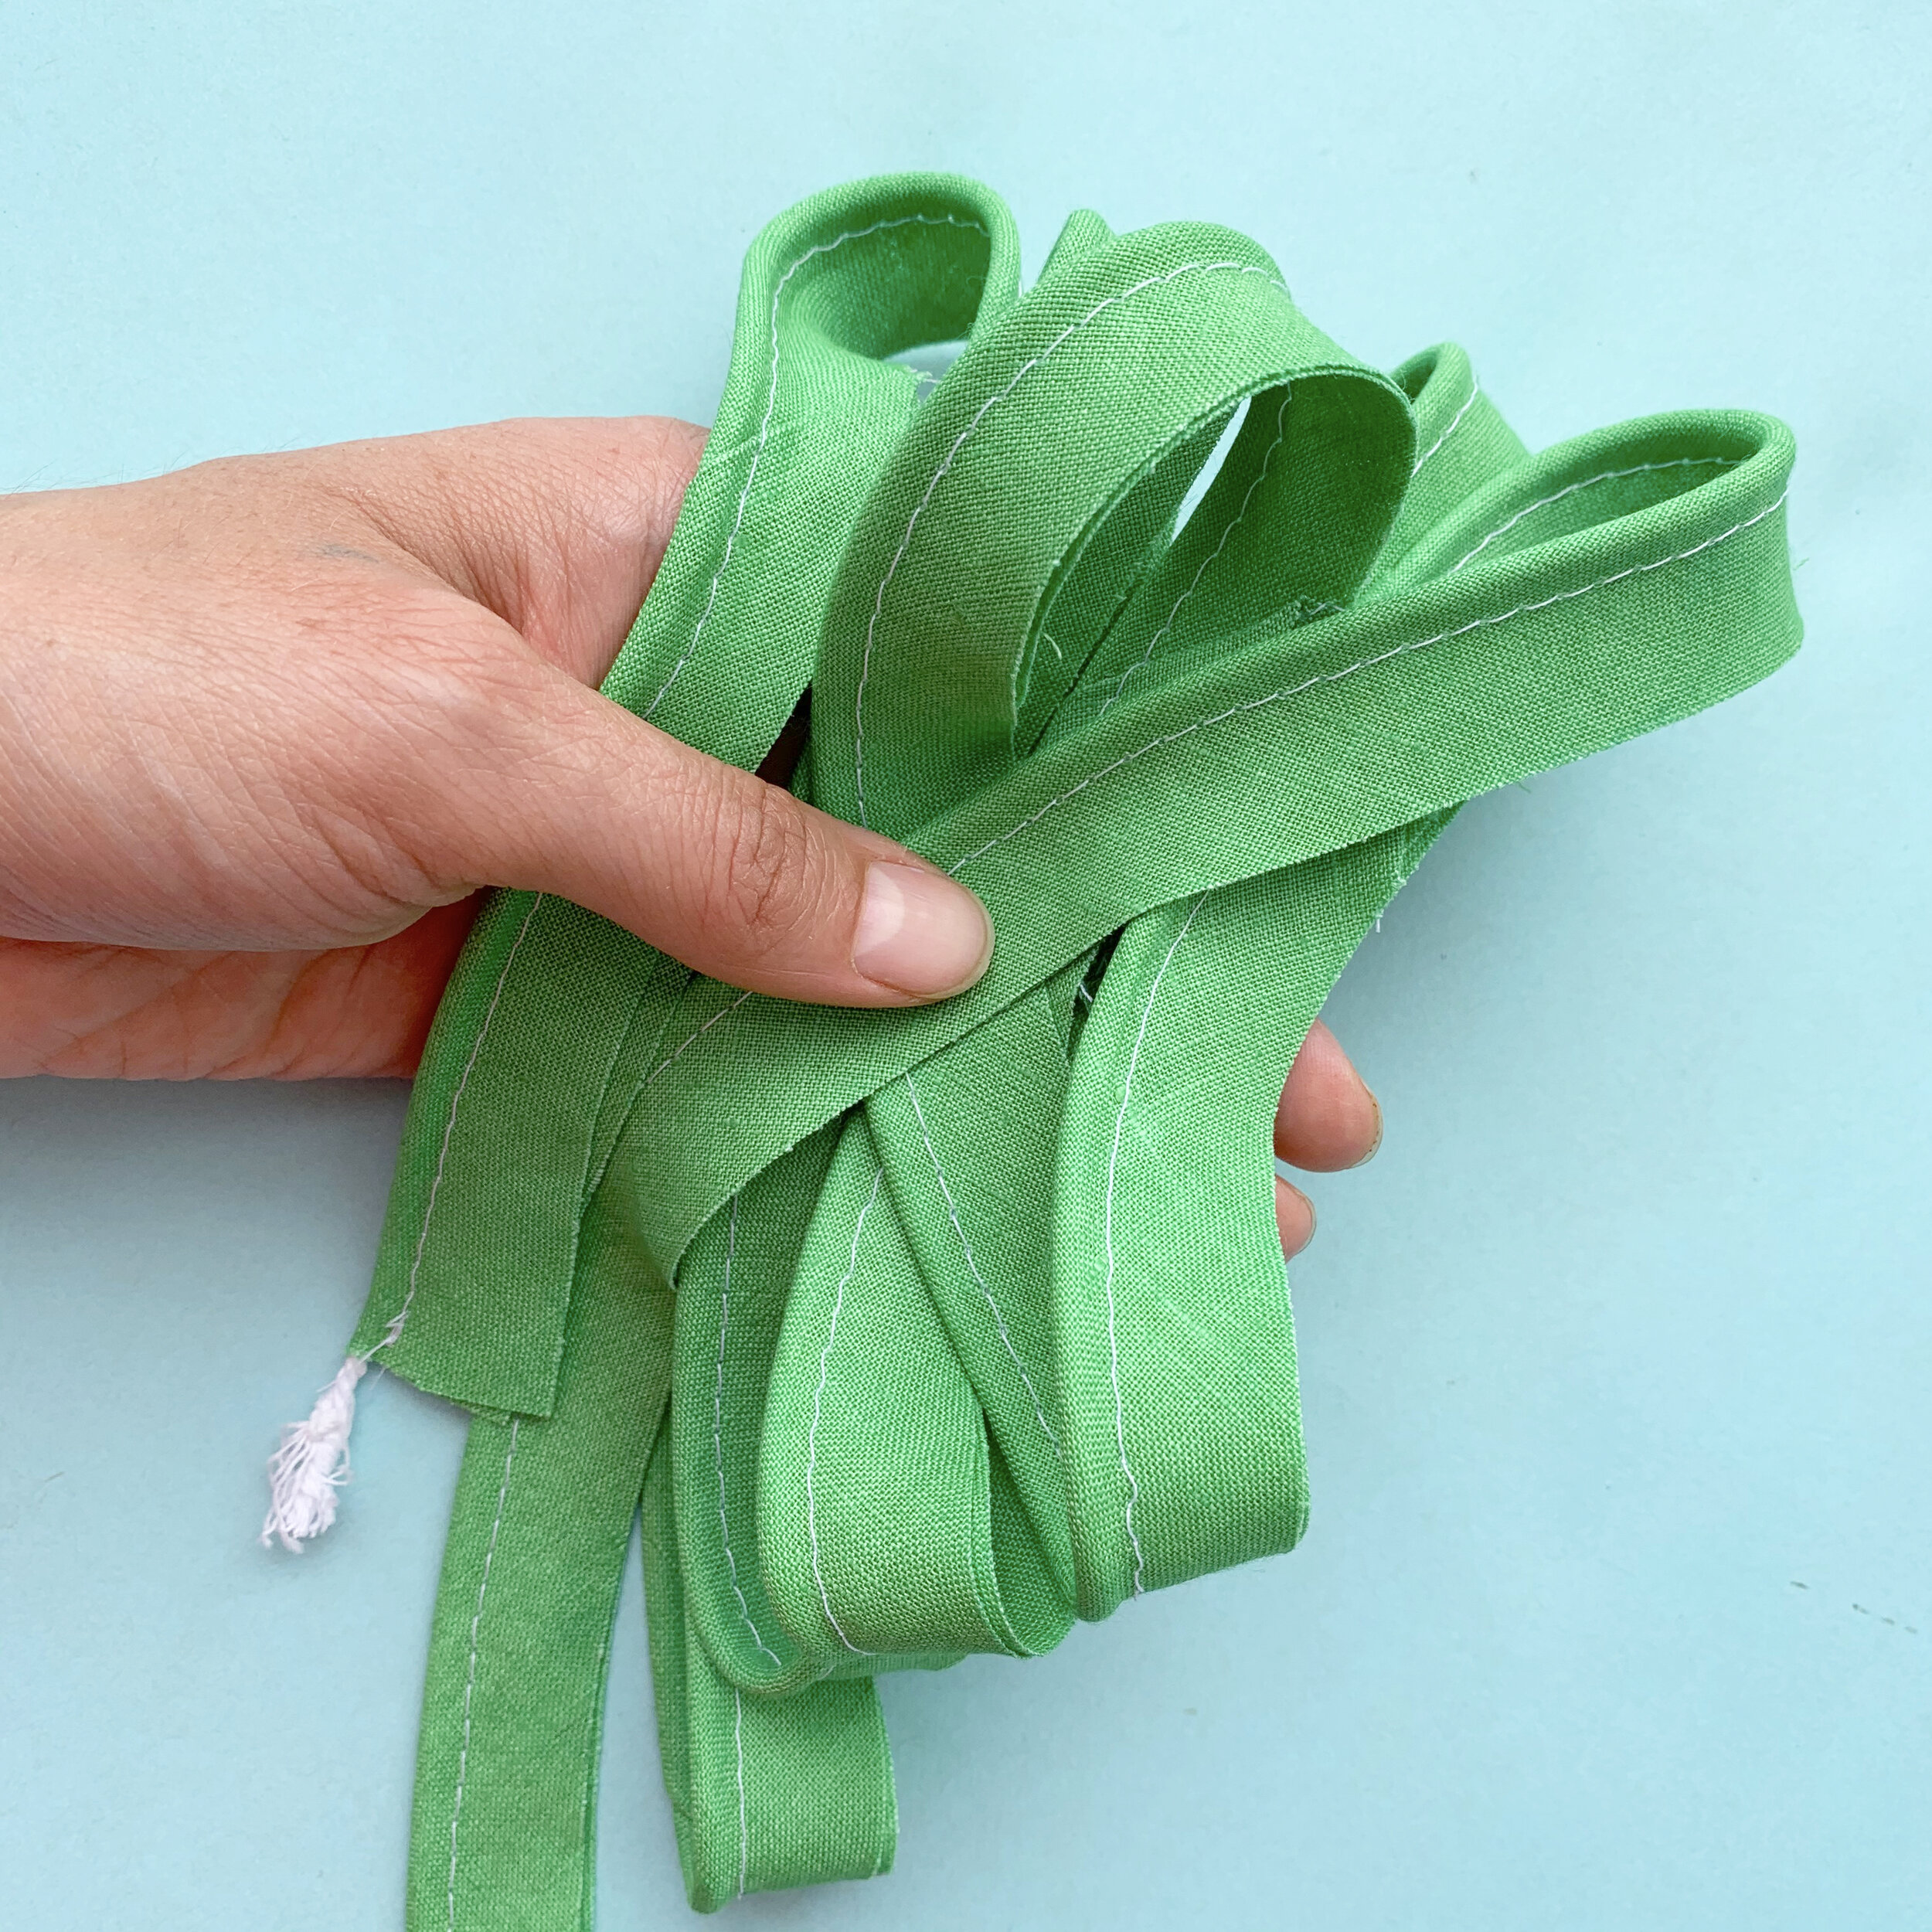 How to Make Your Own Piping or Cording for Sewing DIY